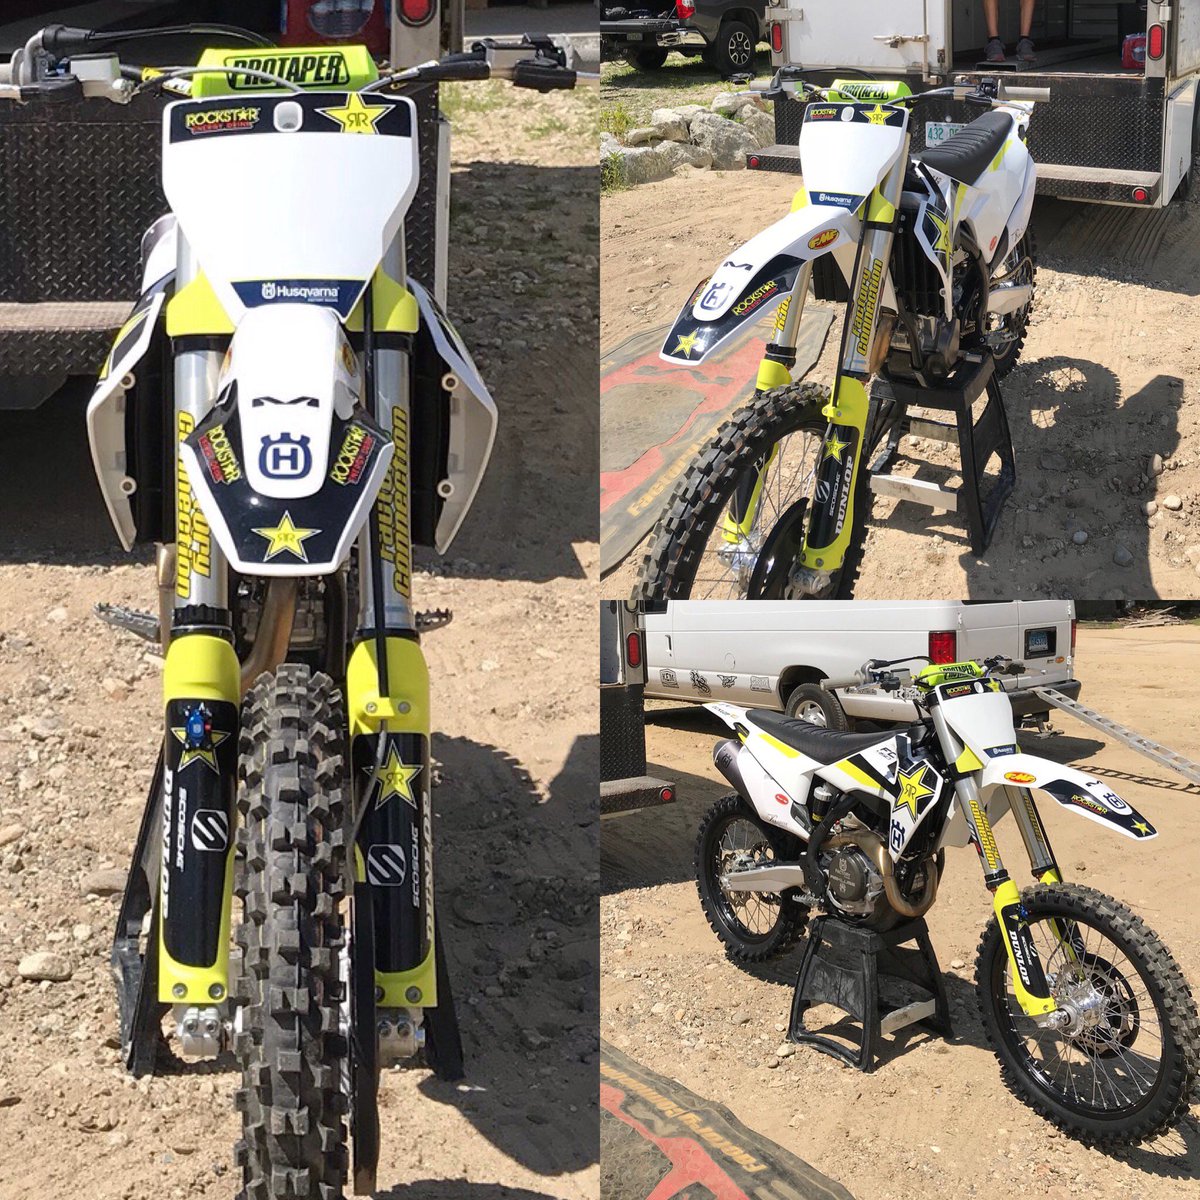 Field testing some Rockstar Edition Husqvarna 450 settings. These things are good! And how about that matchy-match color scheme that's going on? Those FC decals look right at home on these bikes!